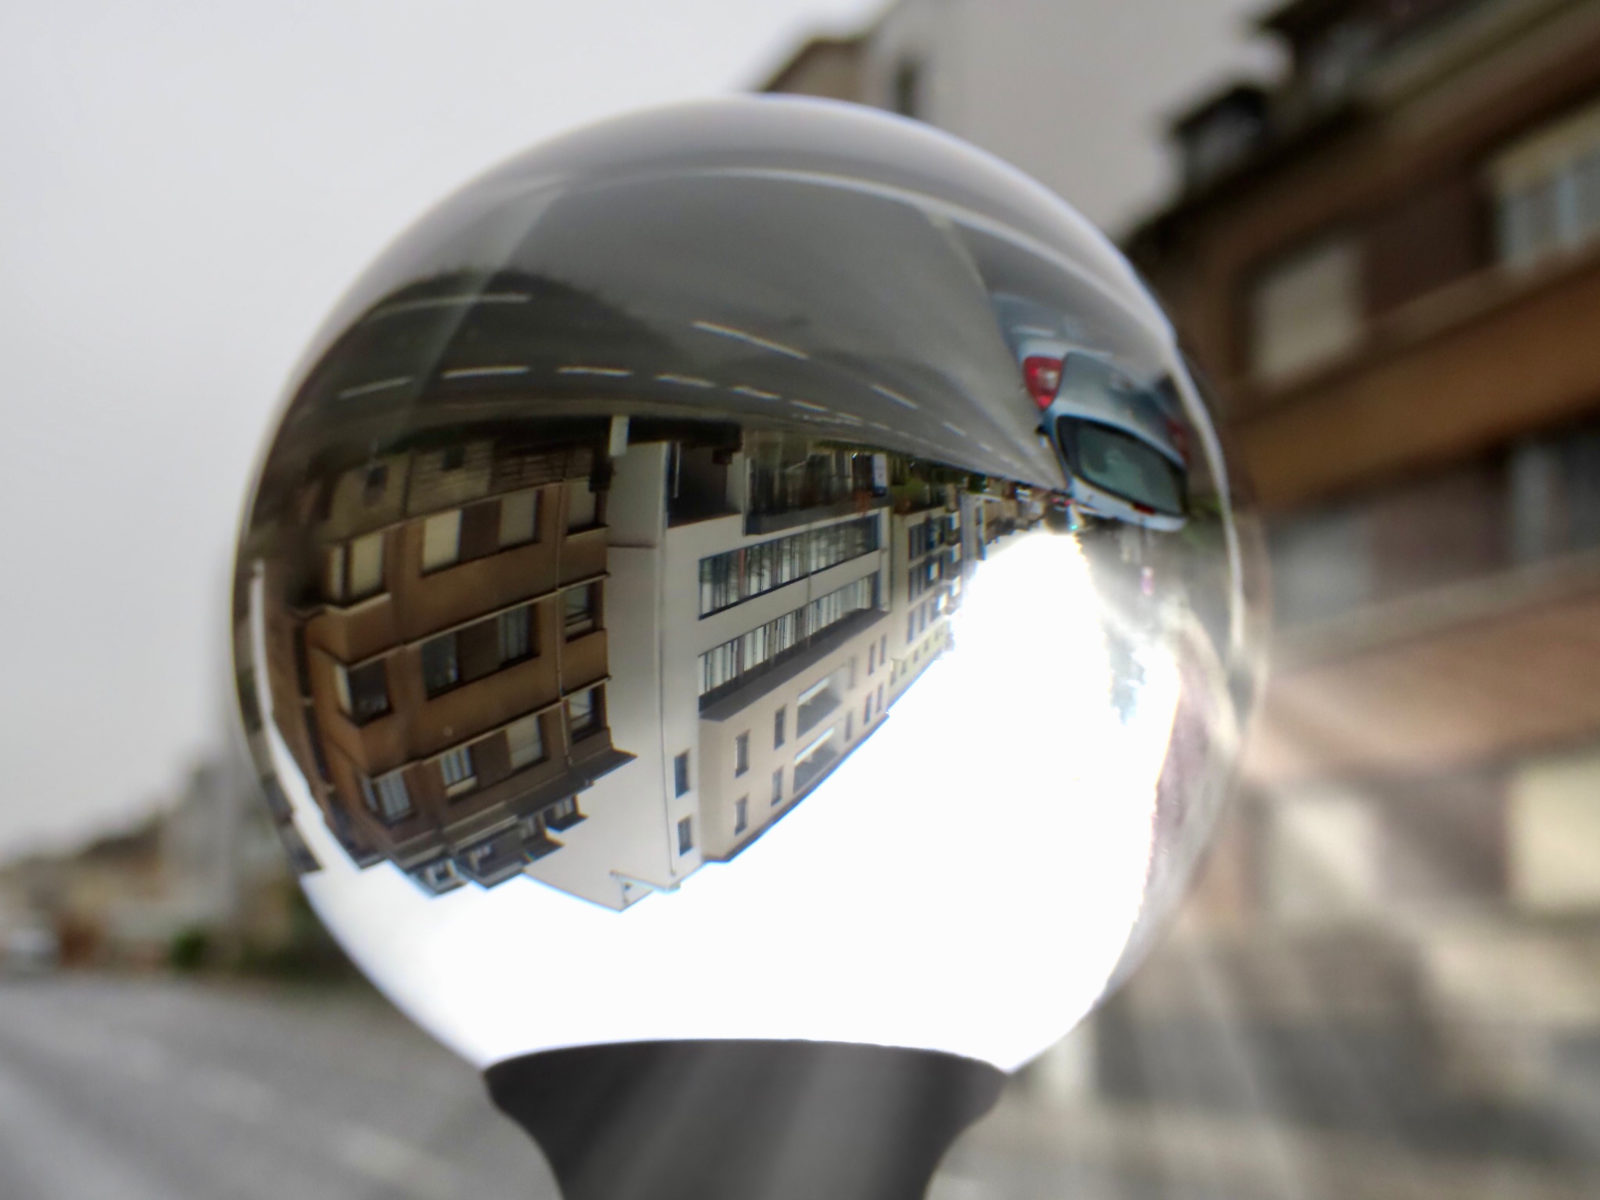 Distorted image of a town street on a rainy day with rare ray of sun shining through crystal ball